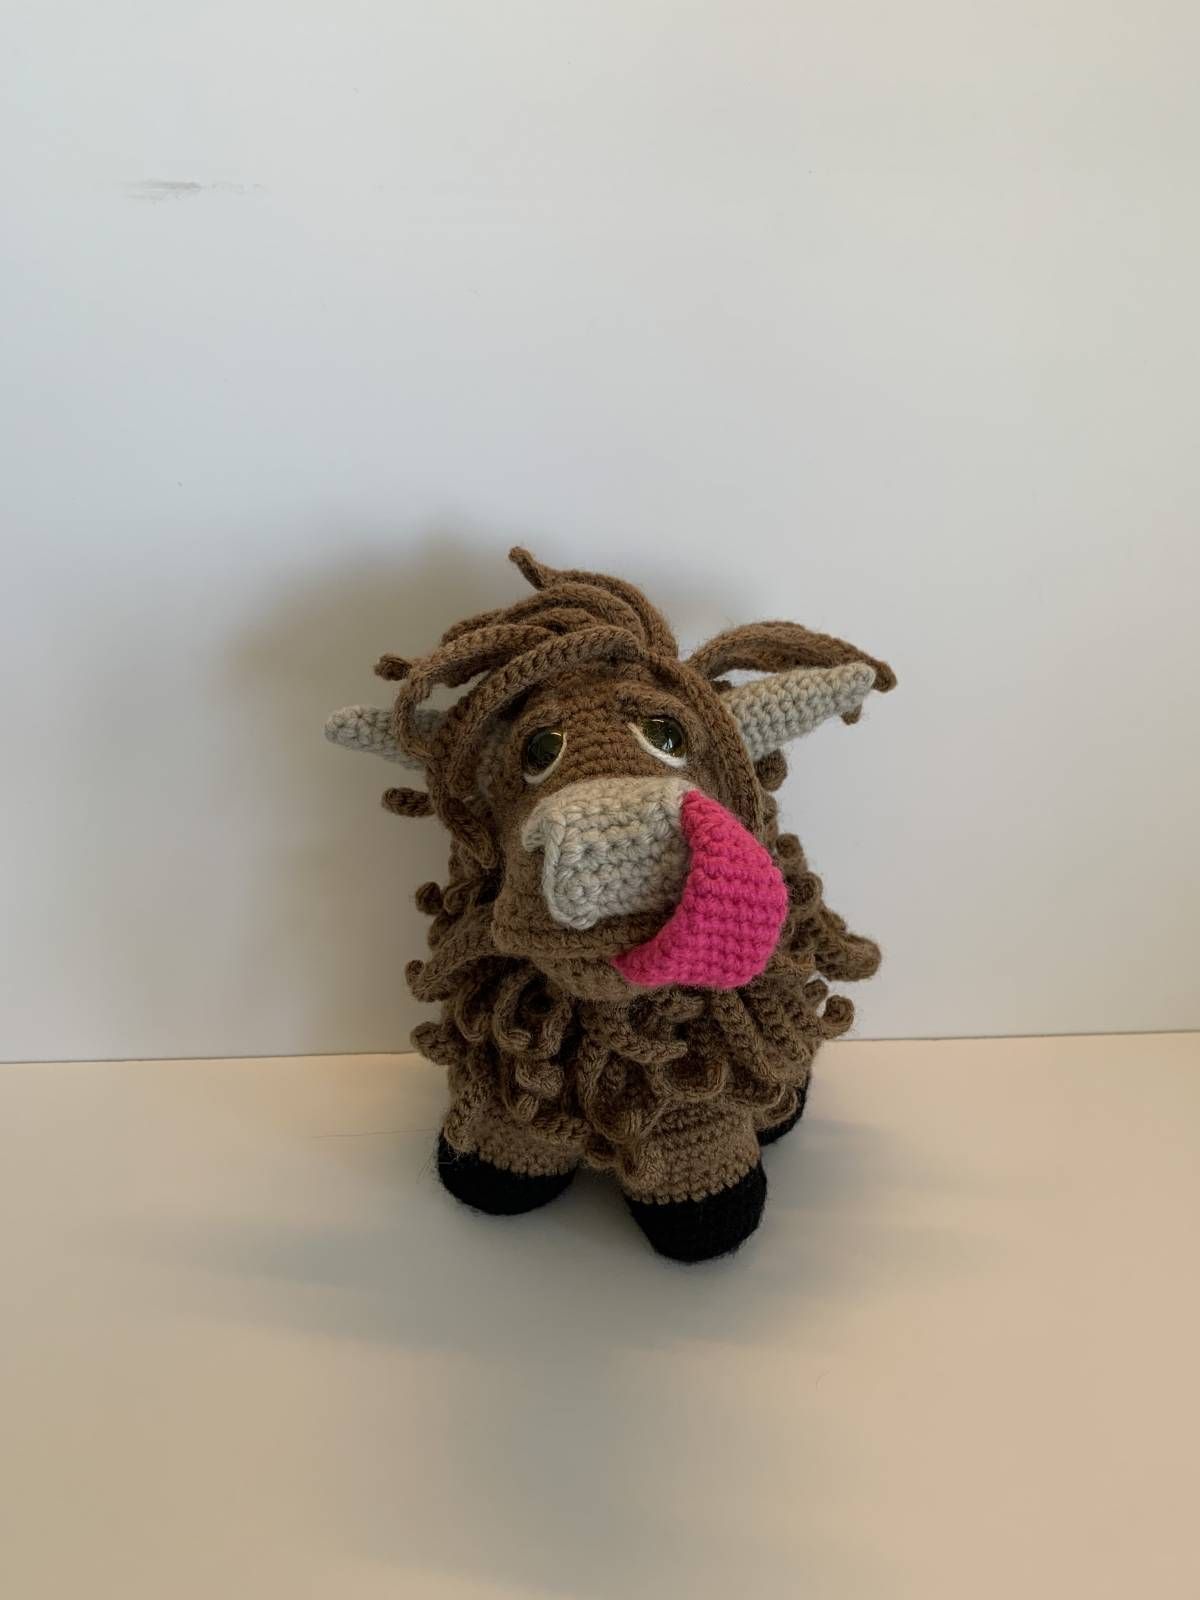 Crochet Amigurumi Highland Cow Pattern Review by Chelsea Gregerson for Cottontail Whiskers